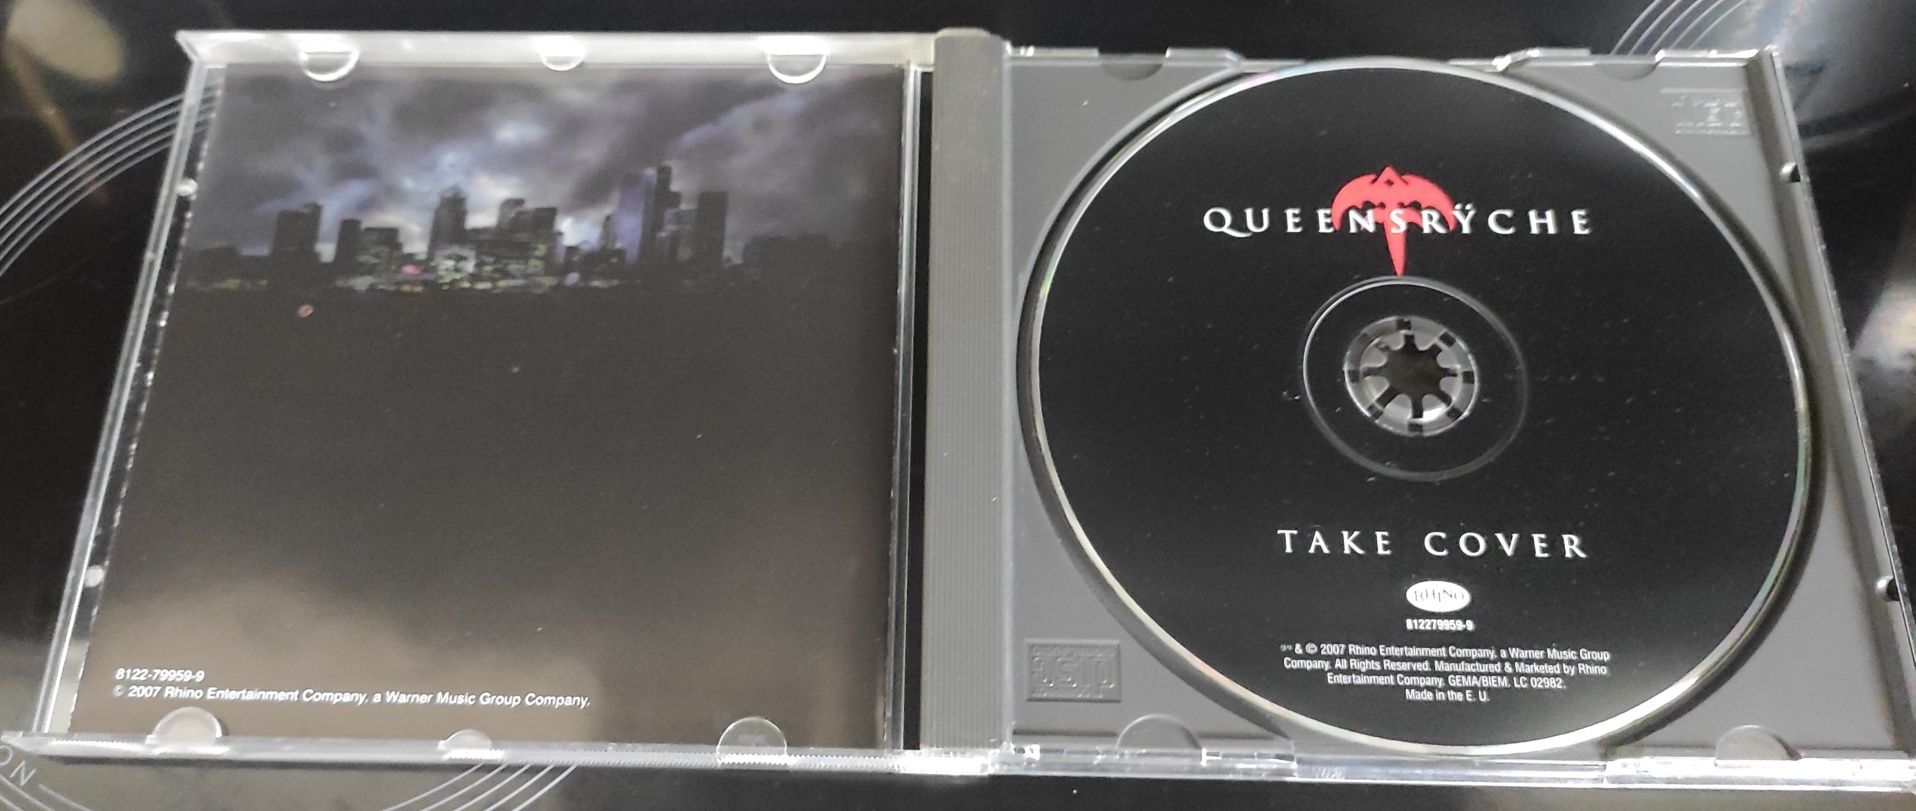 Queensryche "Take Cover" cd